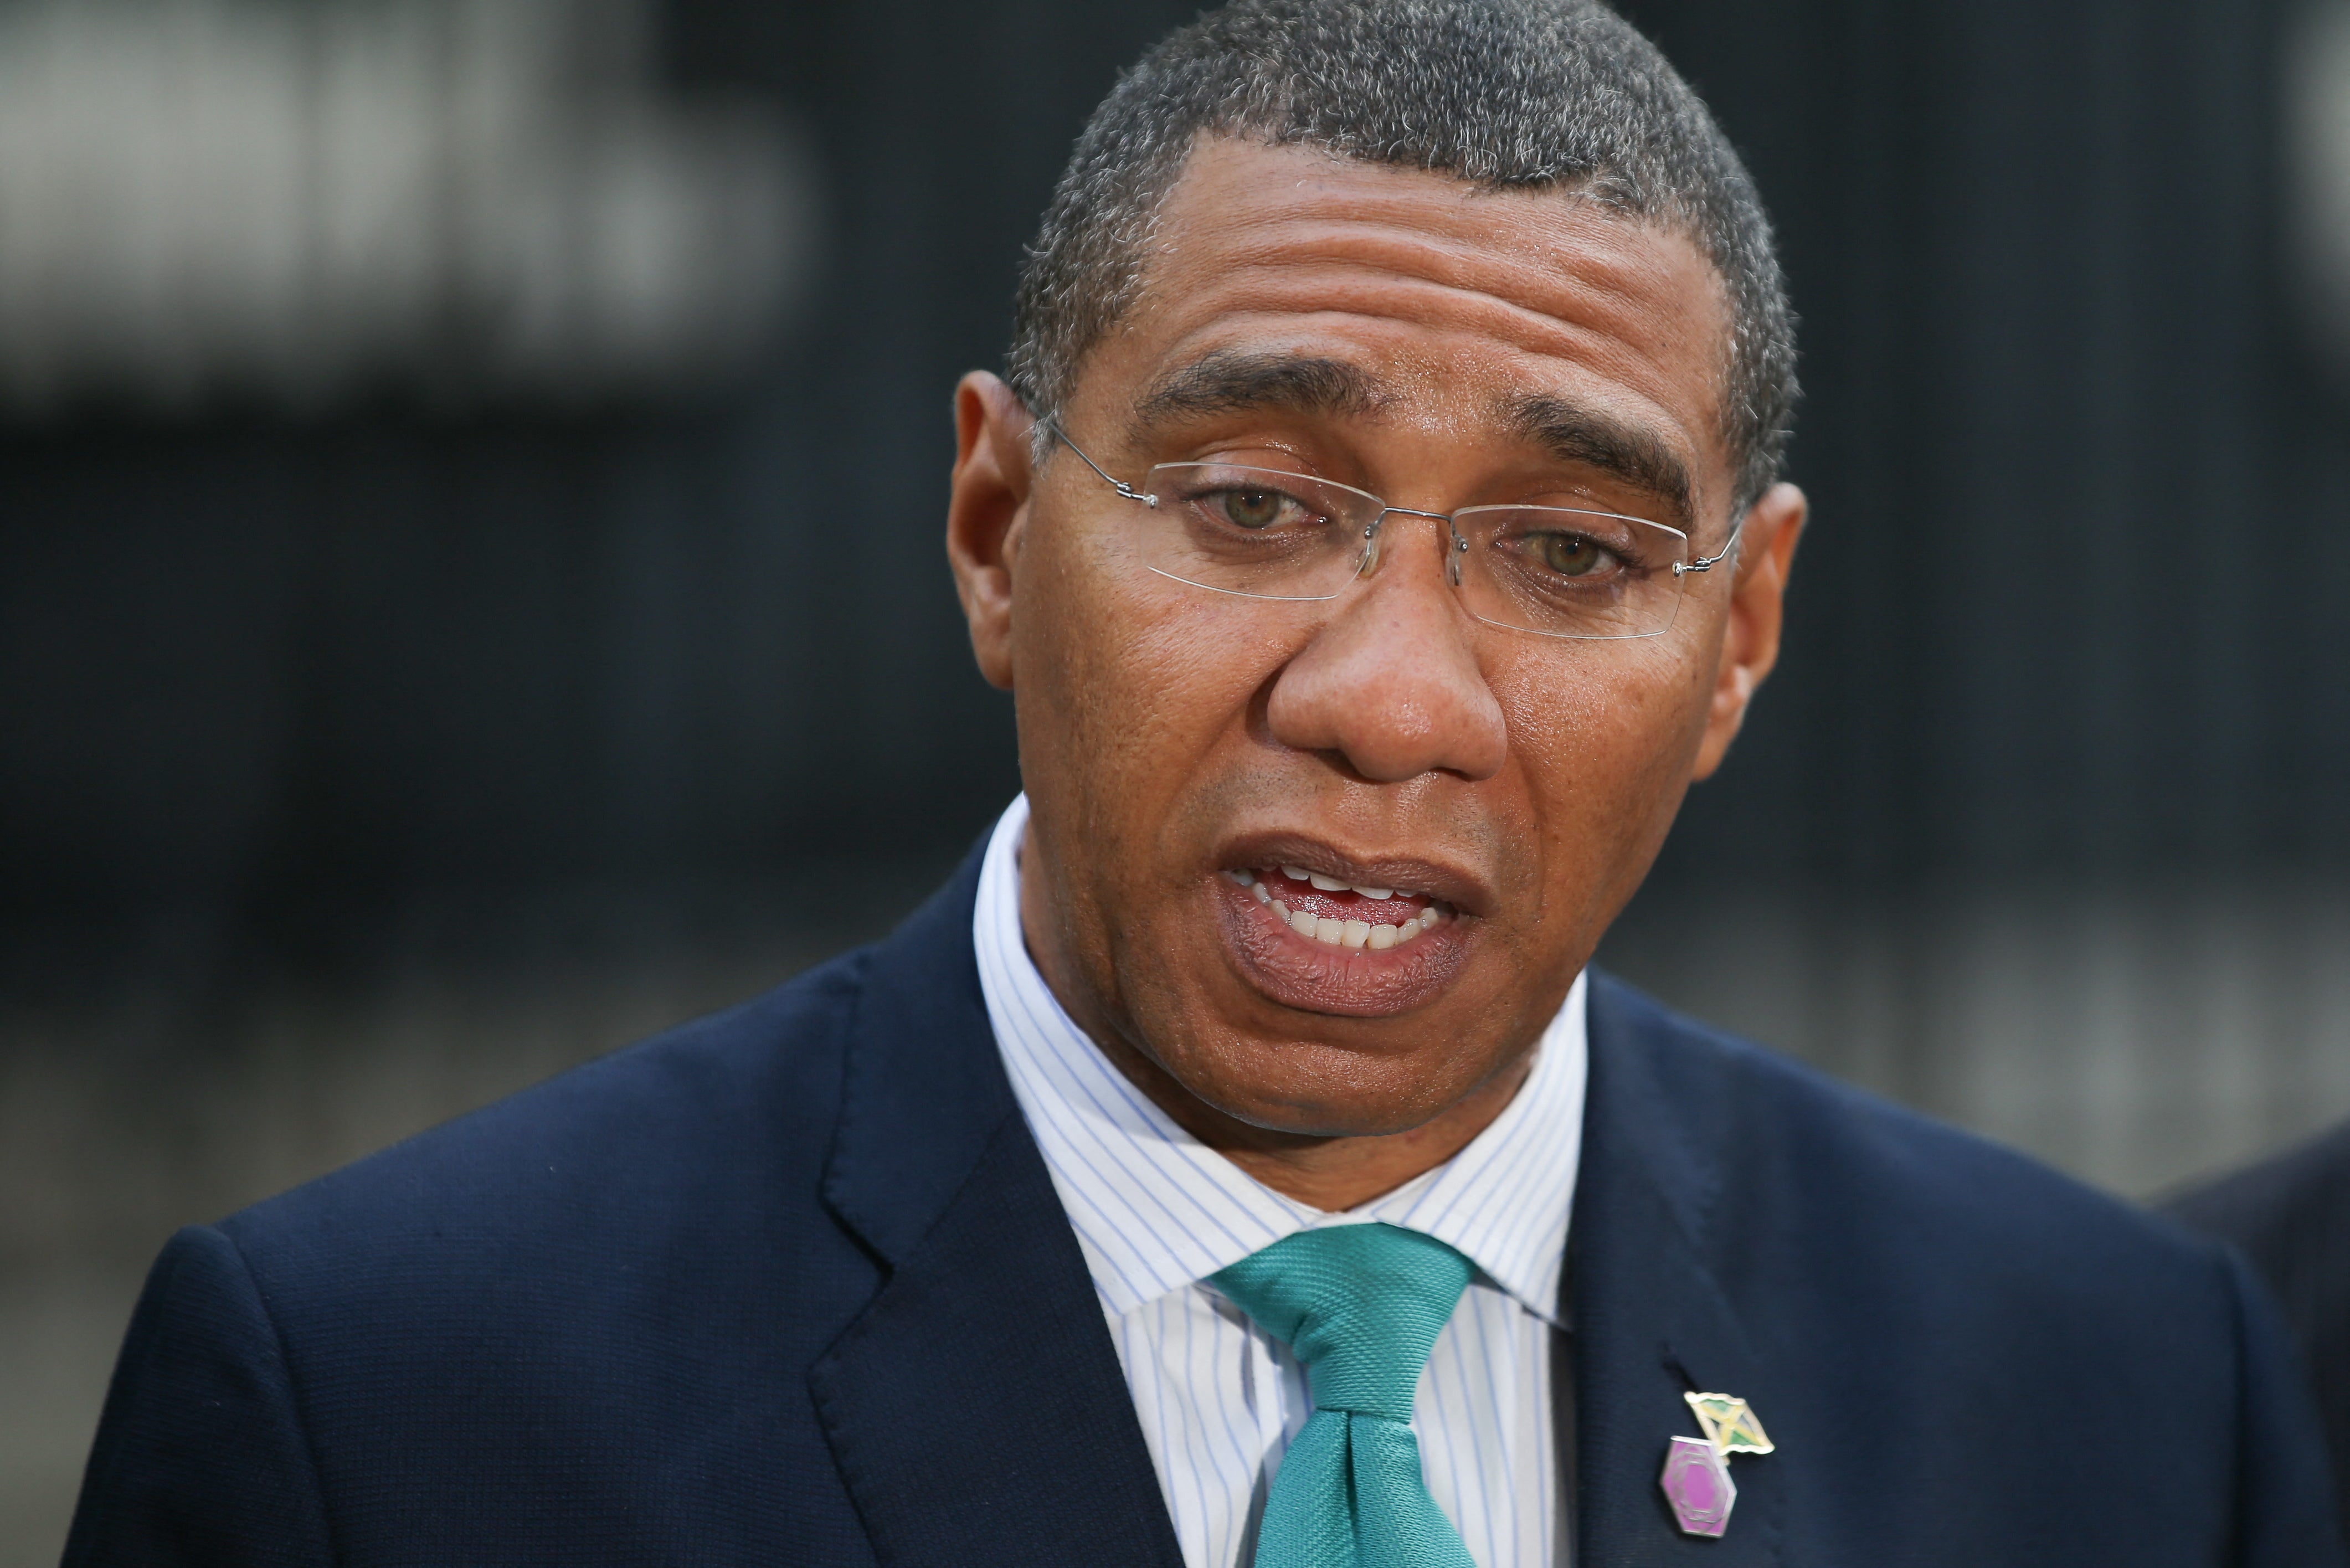 Campaigners have questioned the prime minister Andrew Holness’s intentions on the republic issue